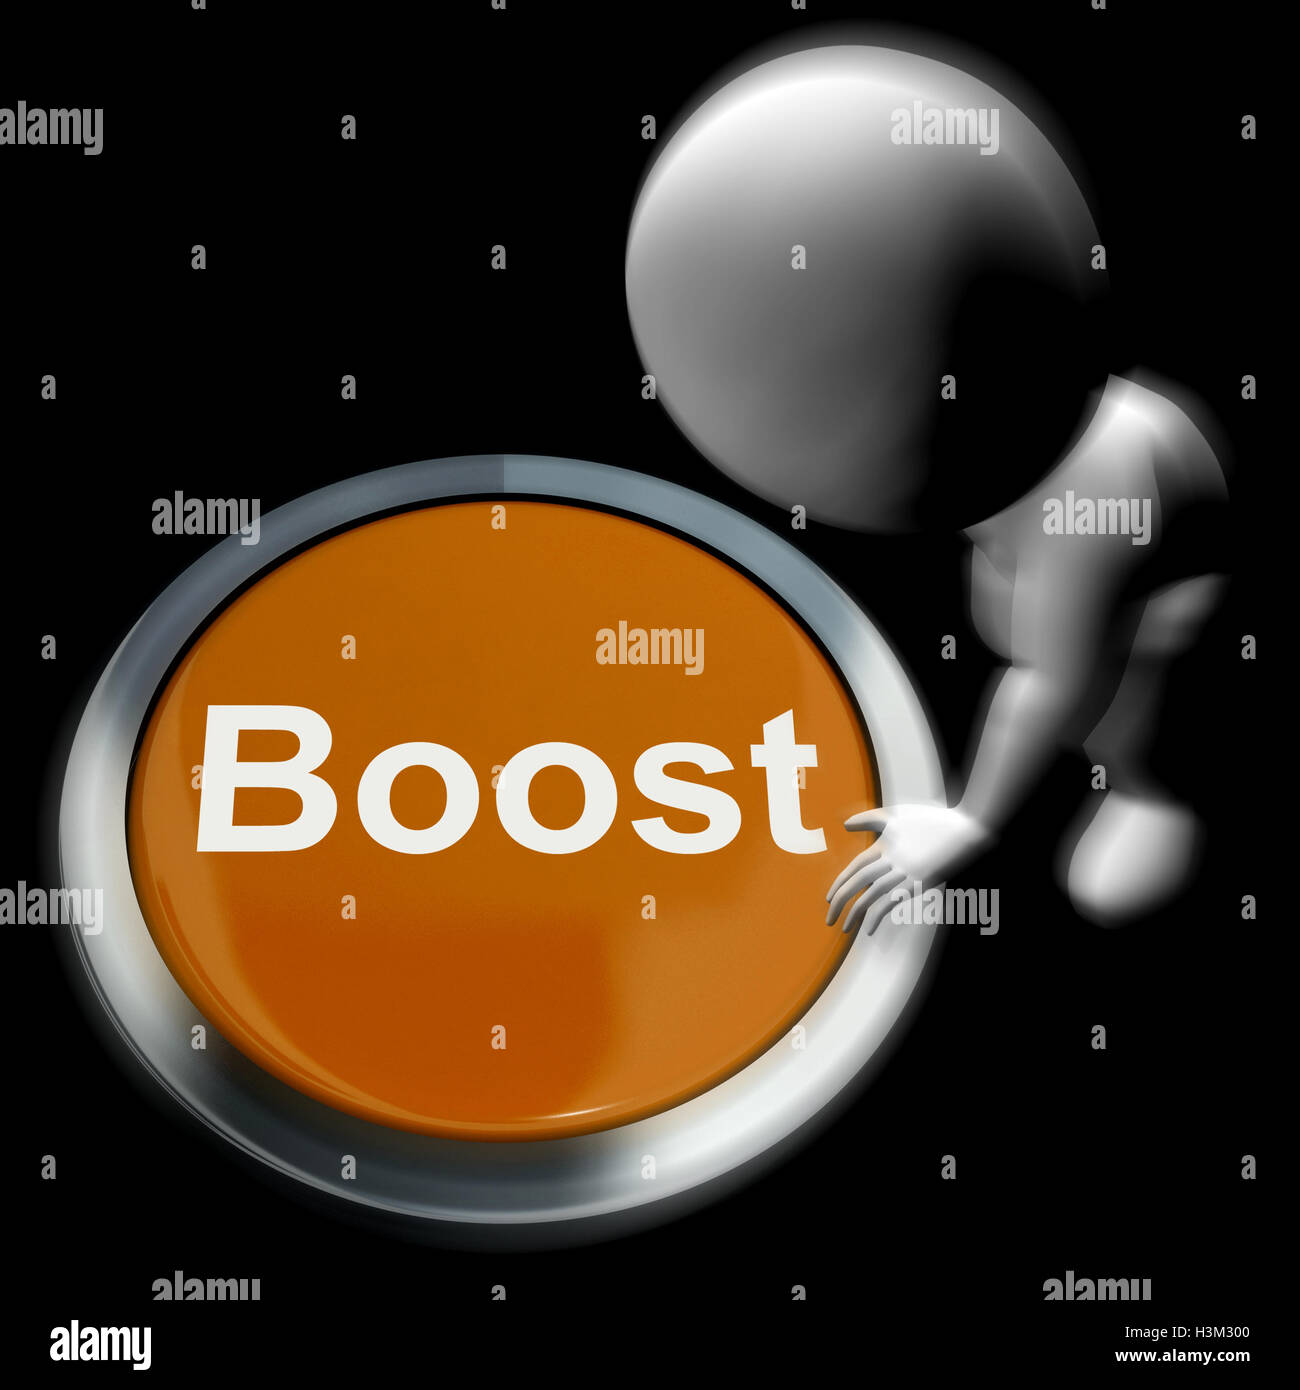 Boost Pressed Means Improvement Upgrade Or Expansion Stock Photo